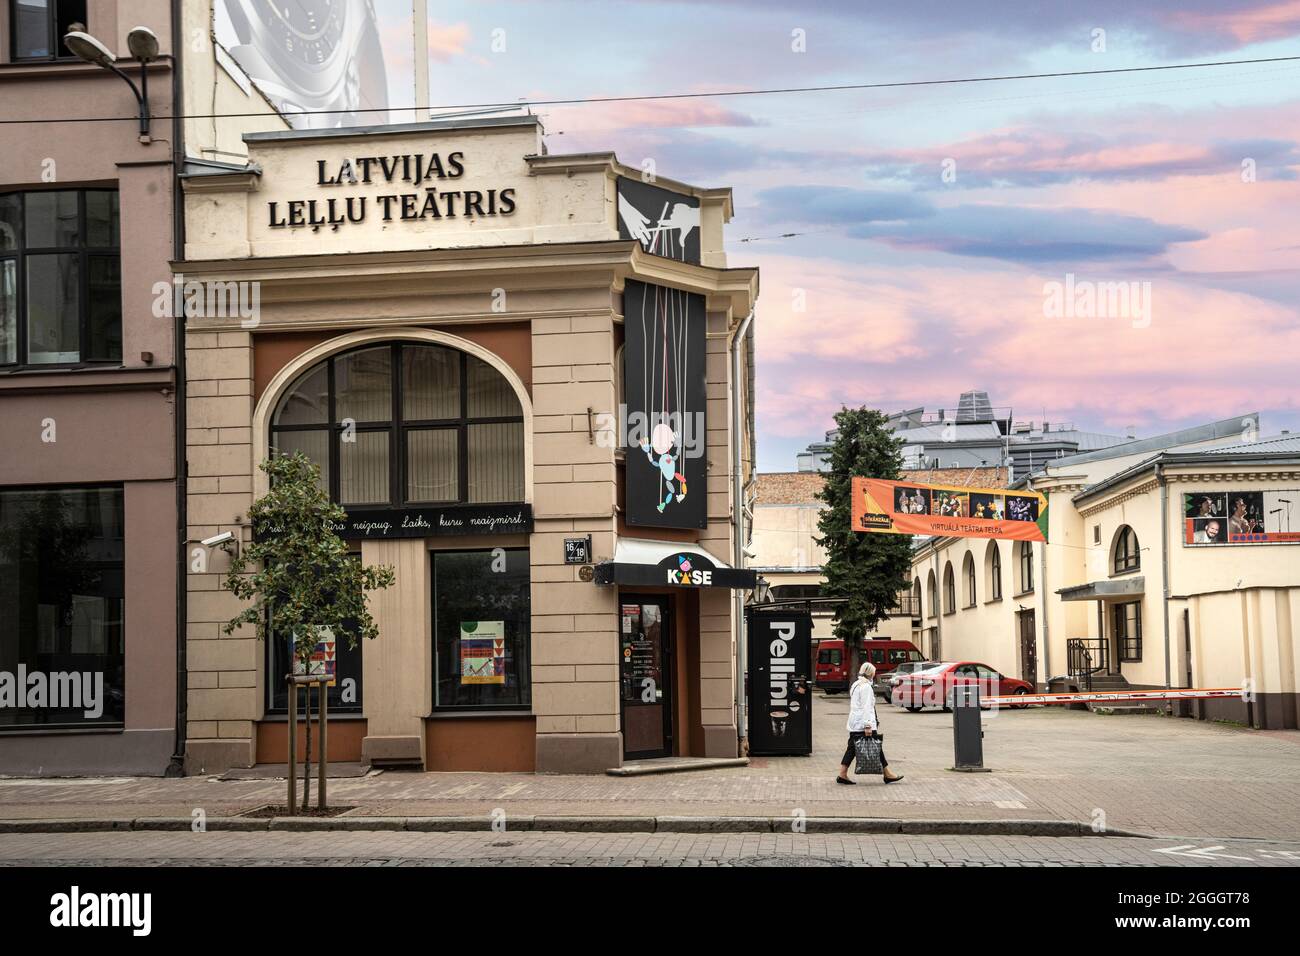 Riga, Latvia. August 2021. The outdoor view of the Latvia Puppet Theatre in the city center Stock Photo